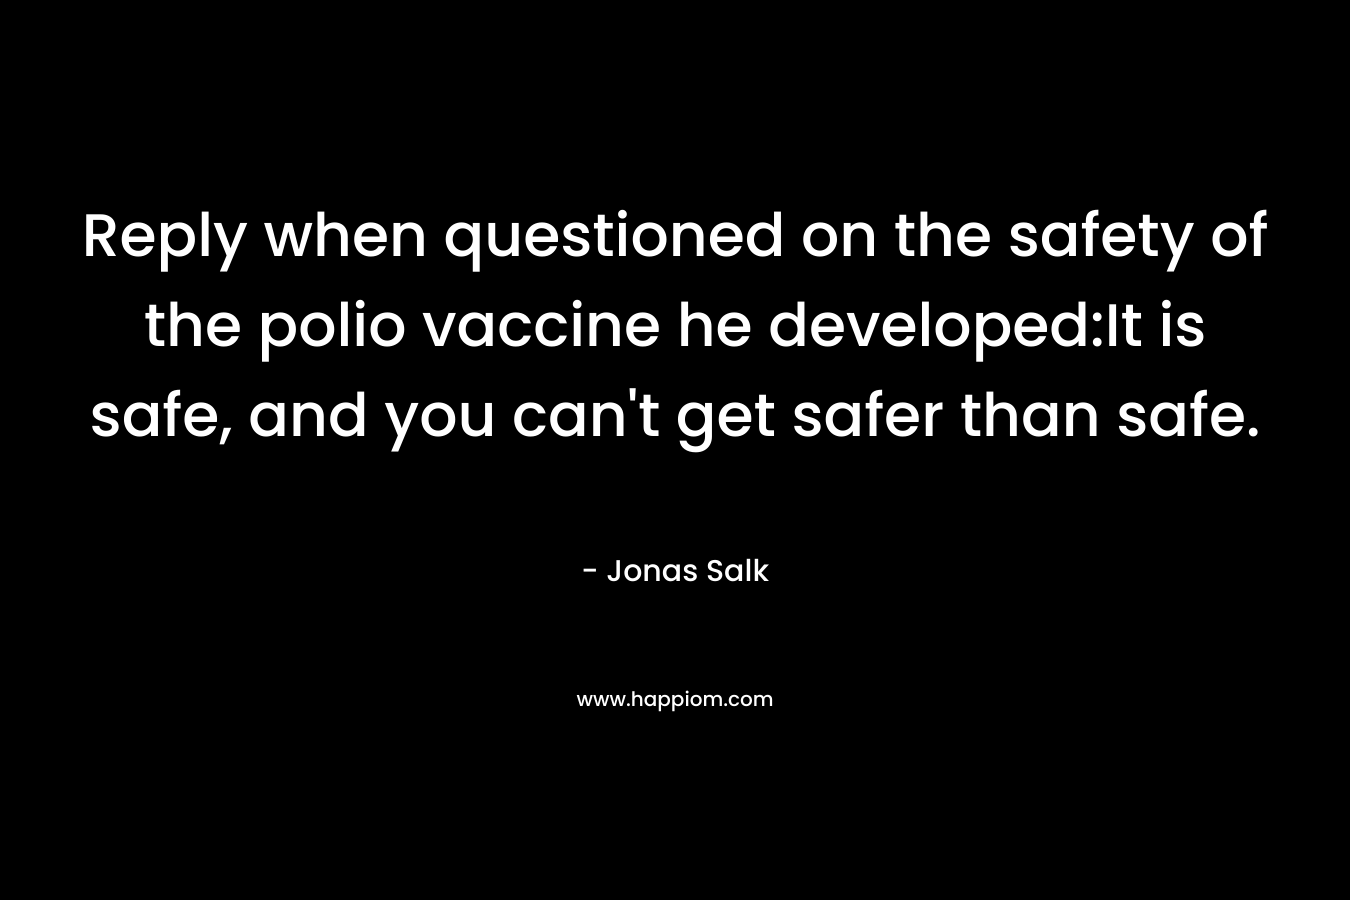 Reply when questioned on the safety of the polio vaccine he developed:It is safe, and you can't get safer than safe.